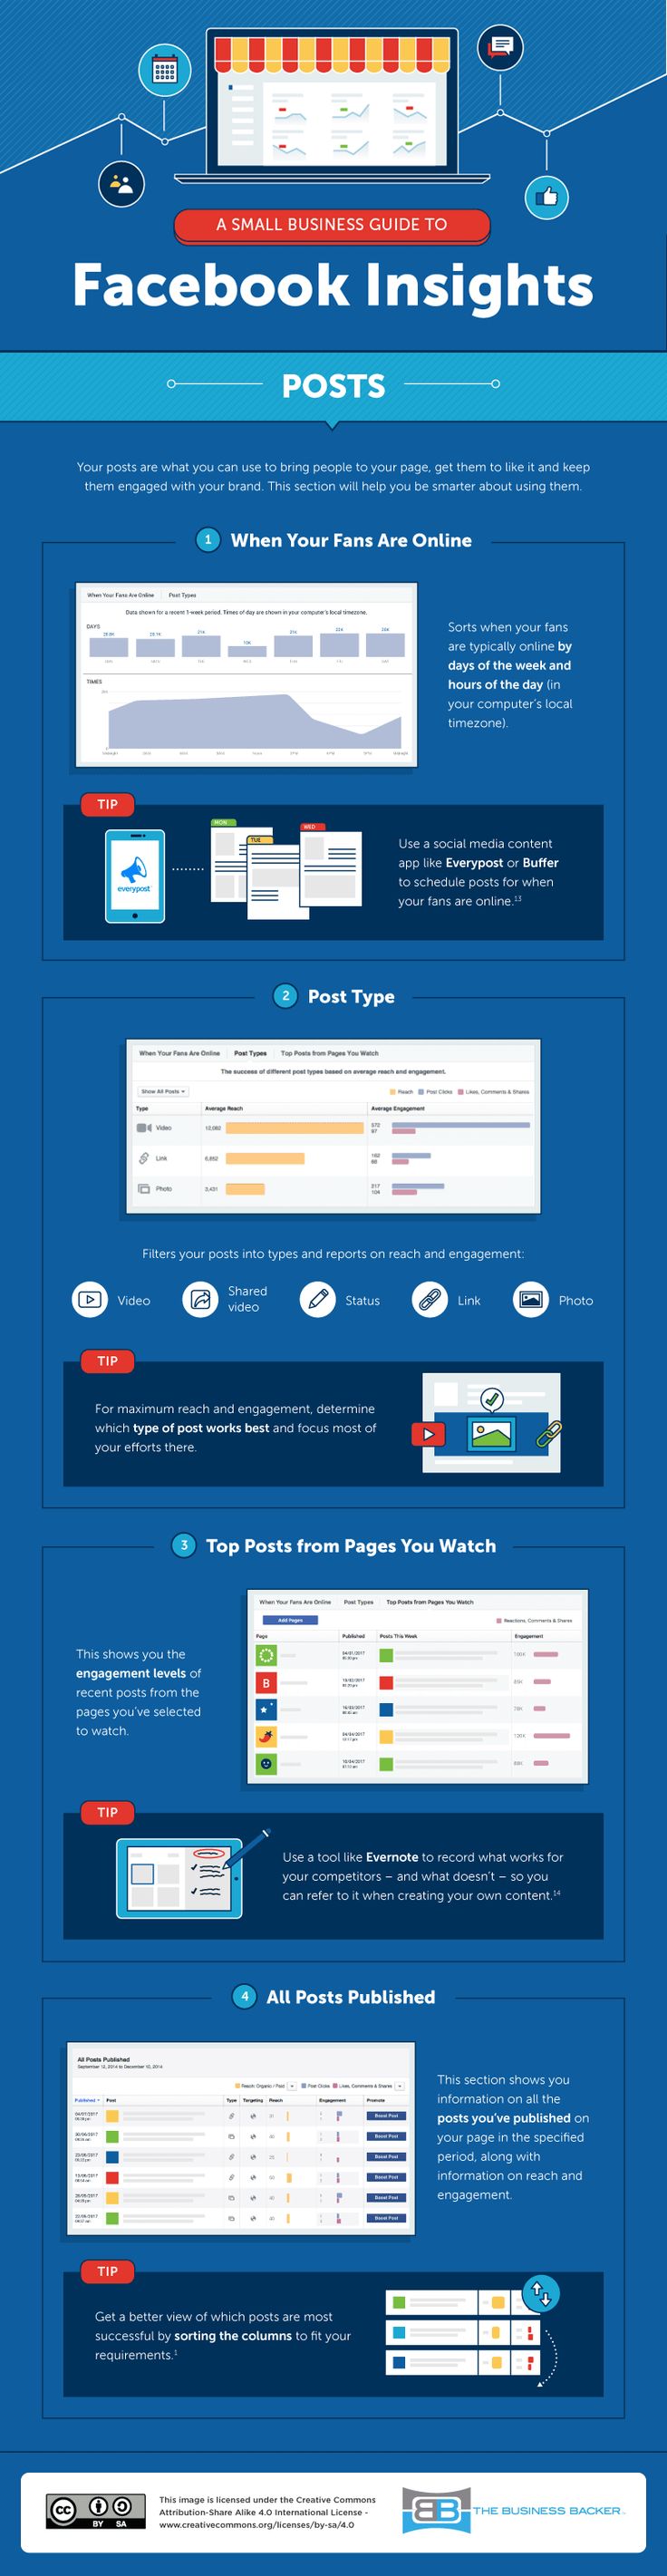 Marketing-Infographic-Small-business-marketing-tips-Wondering-how-to-get-the-most-from-Facebook-Insig Marketing Infographic : Small business marketing tips: Wondering how to get the most from Facebook Insig...